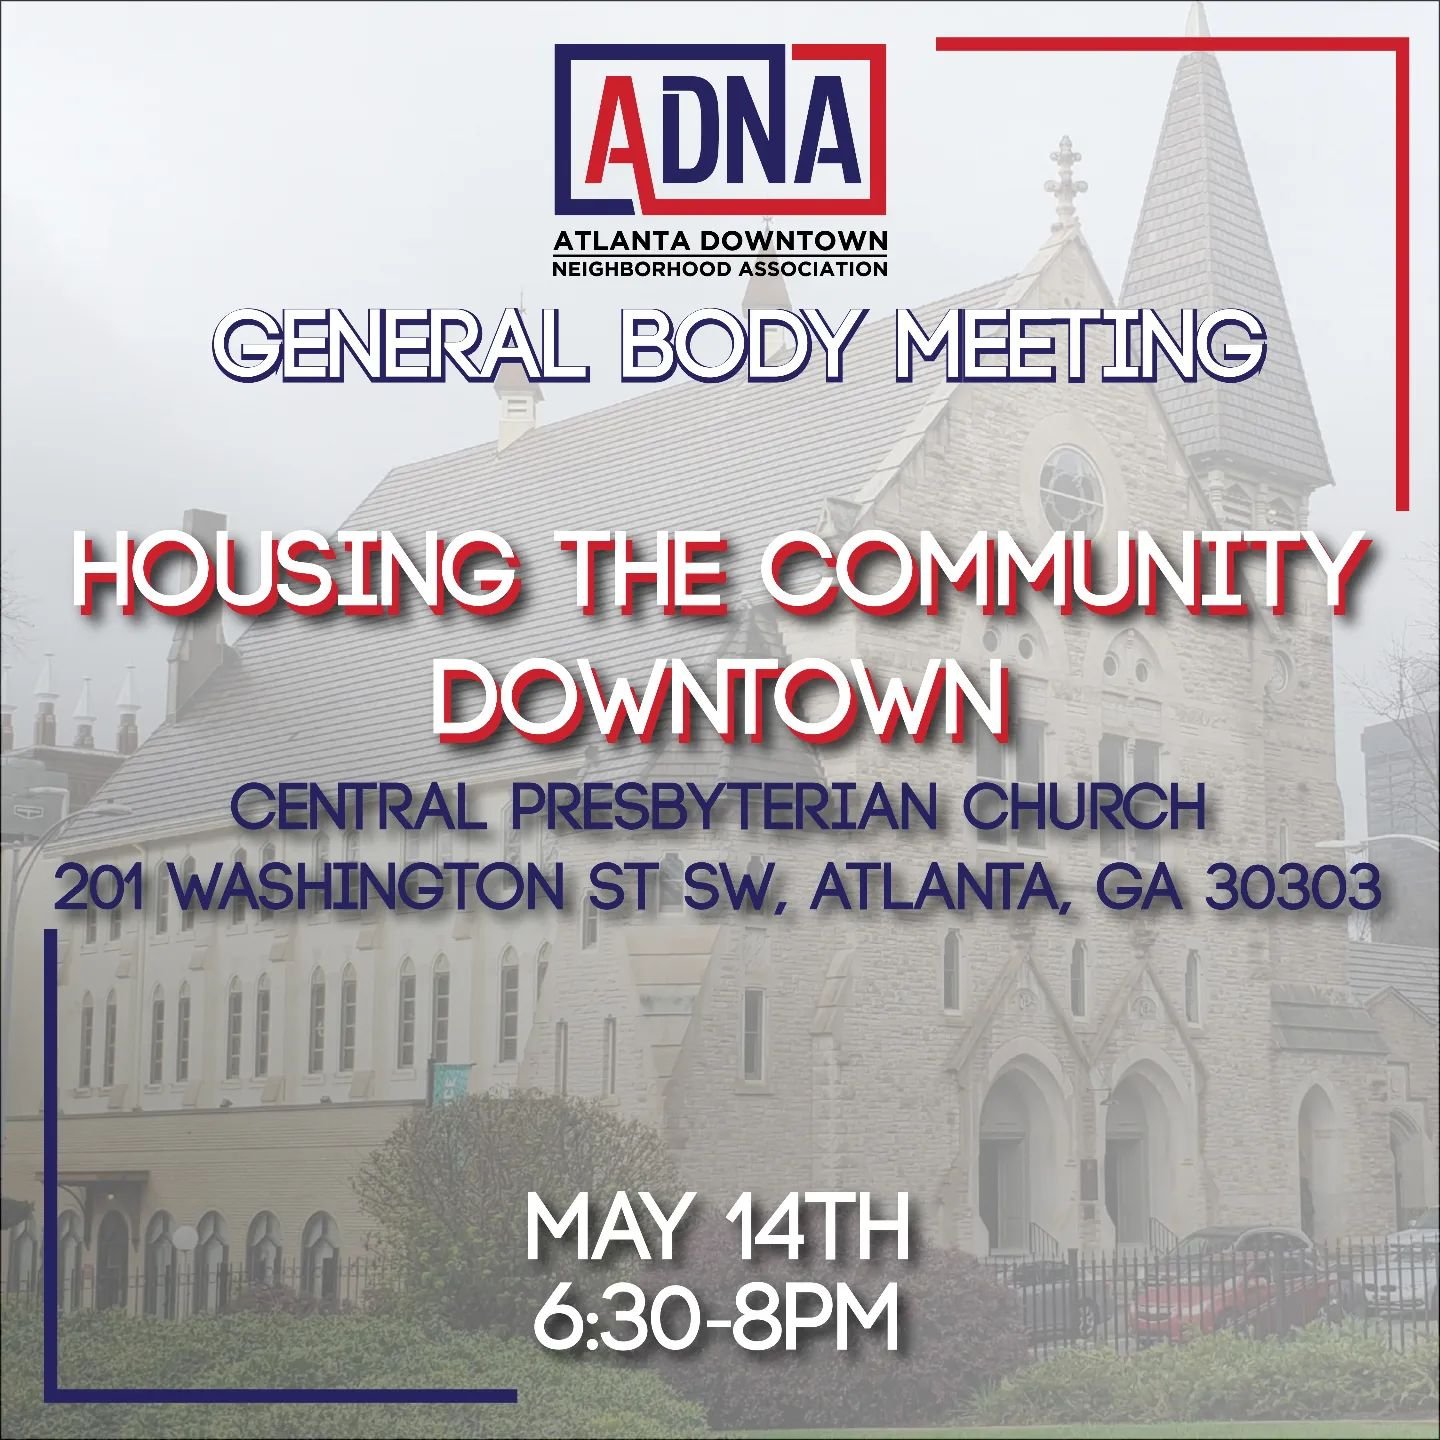 As a continuation of our visit to the Melody in April we will gather at Central Presbyterian along with Gateway Center and Hope Atlanta to further discuss supporting projects like the Melody and helping those unhoused in our Downtown community